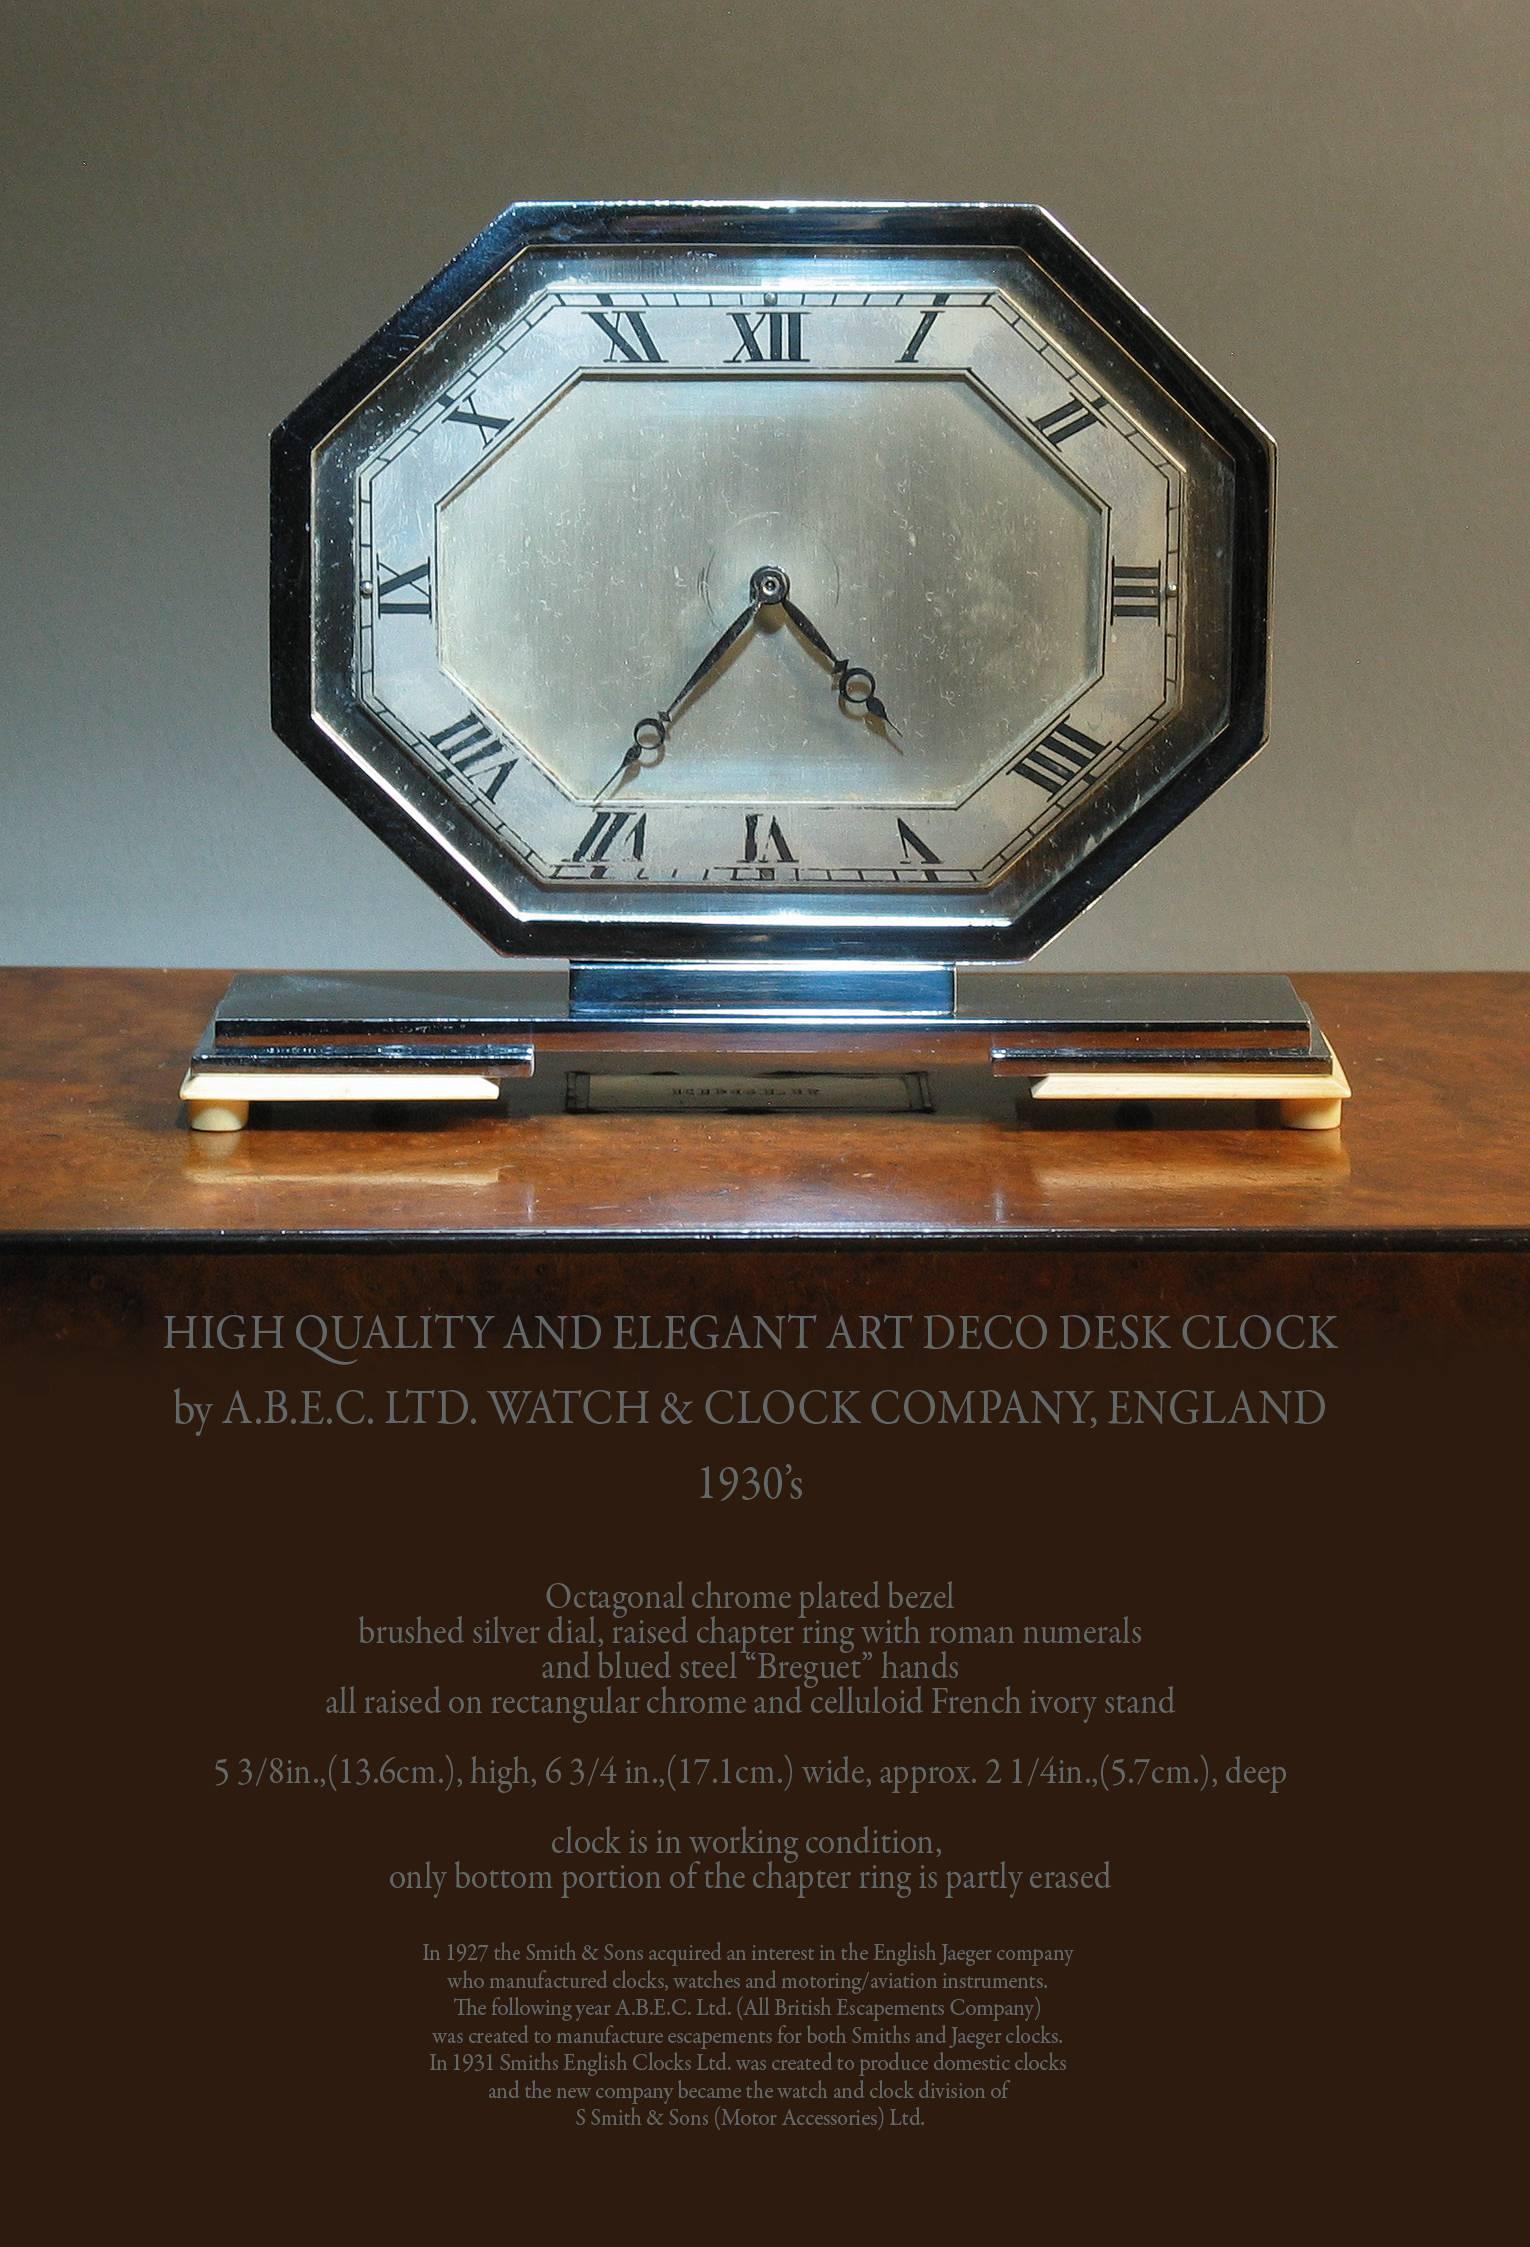 High quality and elegant Art Deco desk clock by A.B.E.C. Ltd. Watch and clock company, England, 1930s. Octagonal chrome-plated bezel, brushed silver dial, raised ring with Roman numerials and blued steel 